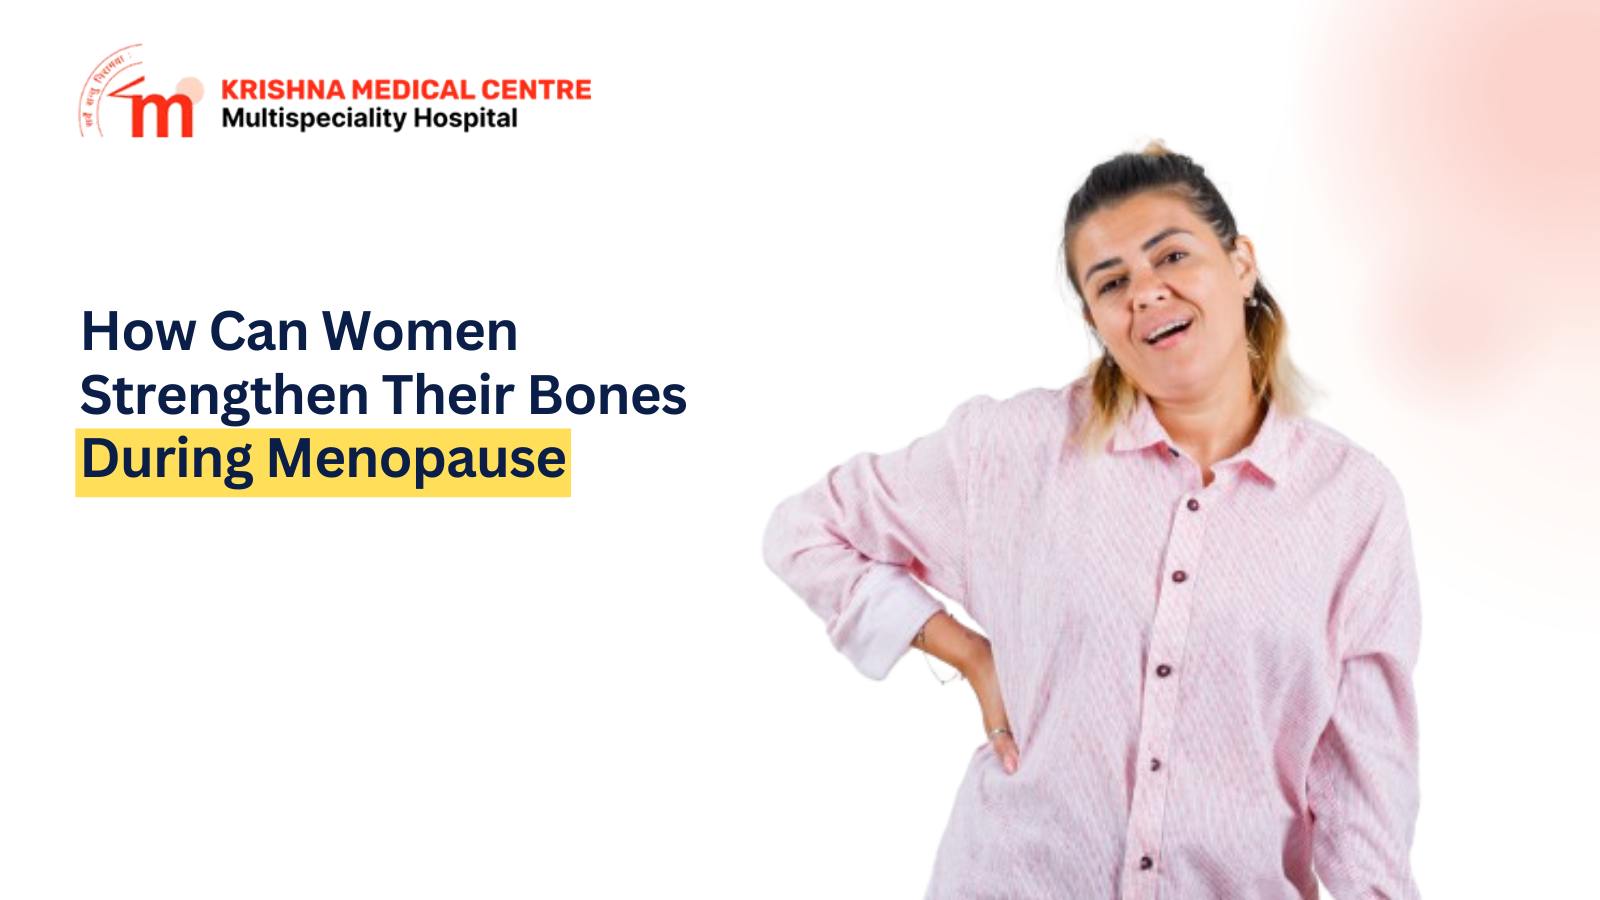 How Can Women Strengthen Their Bones During Menopause